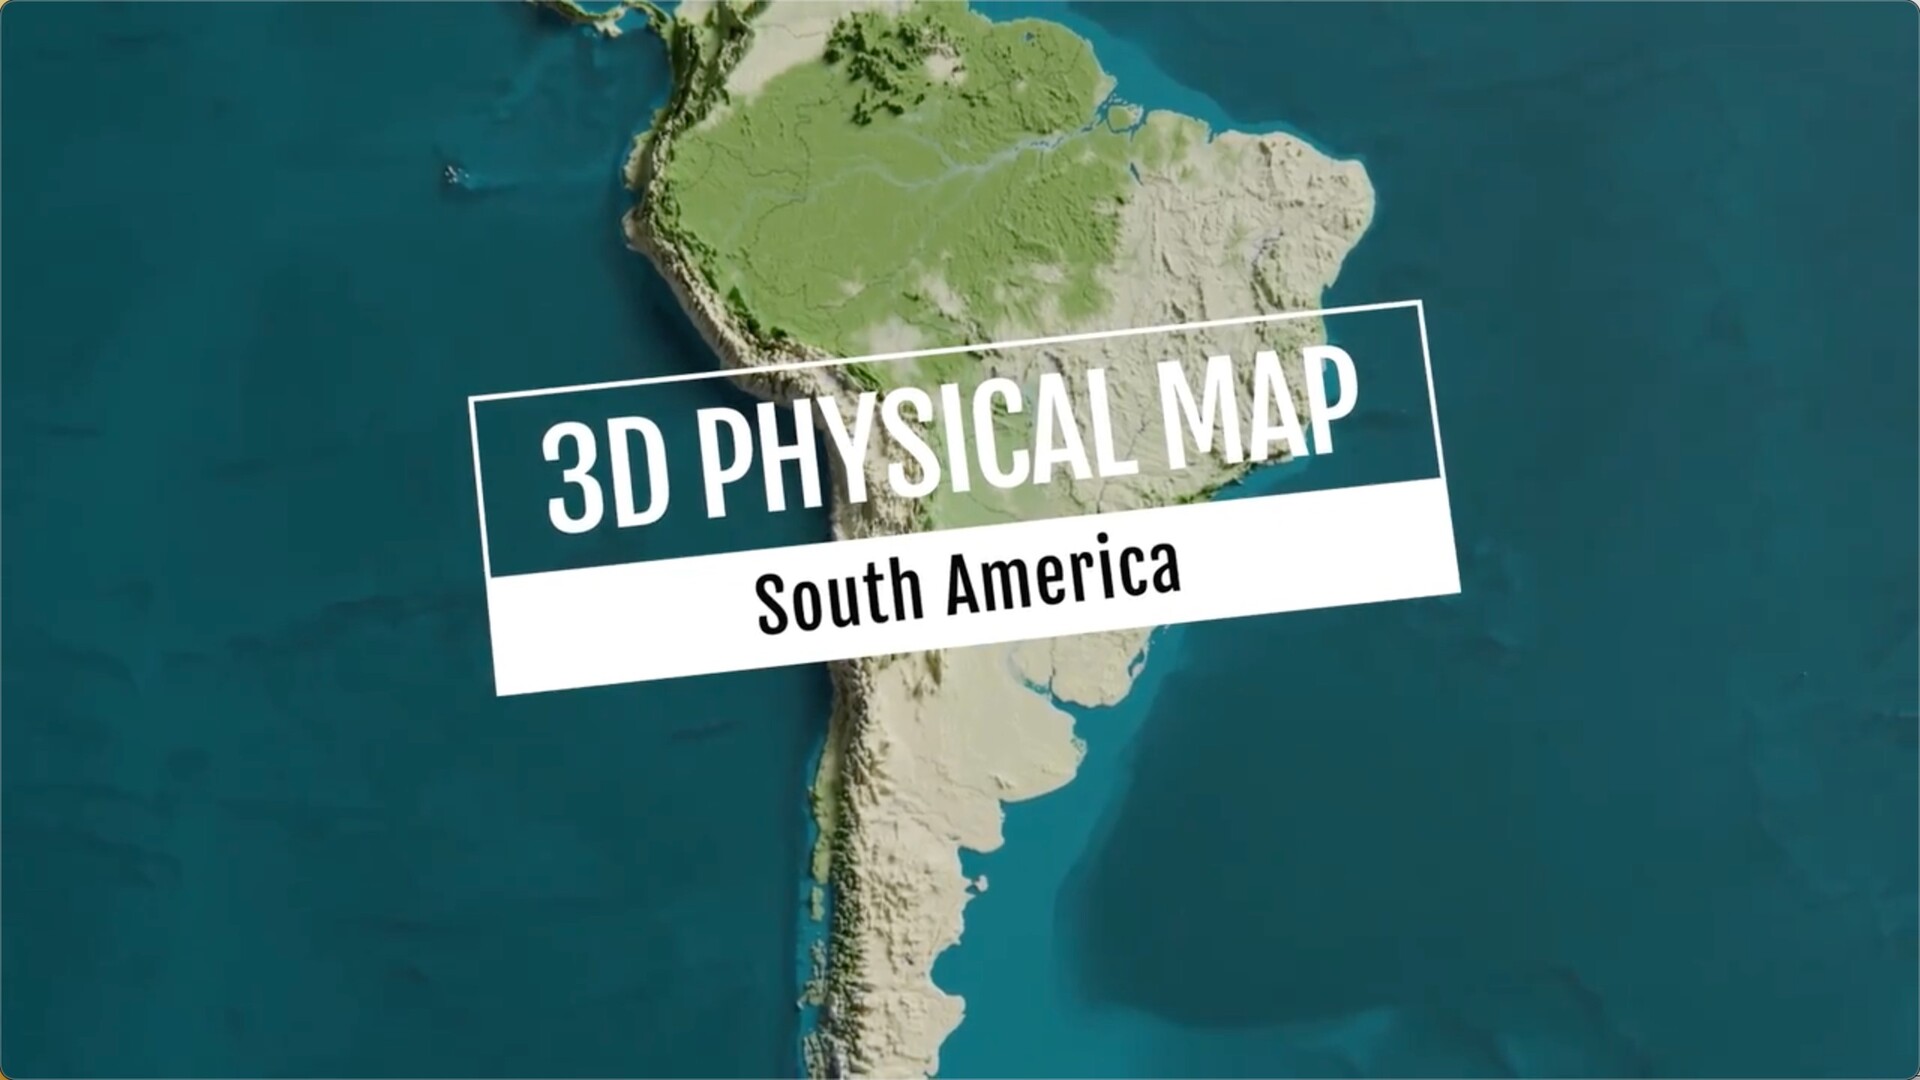 FCPX插件：南美洲3D图素材3D Physical Map South America